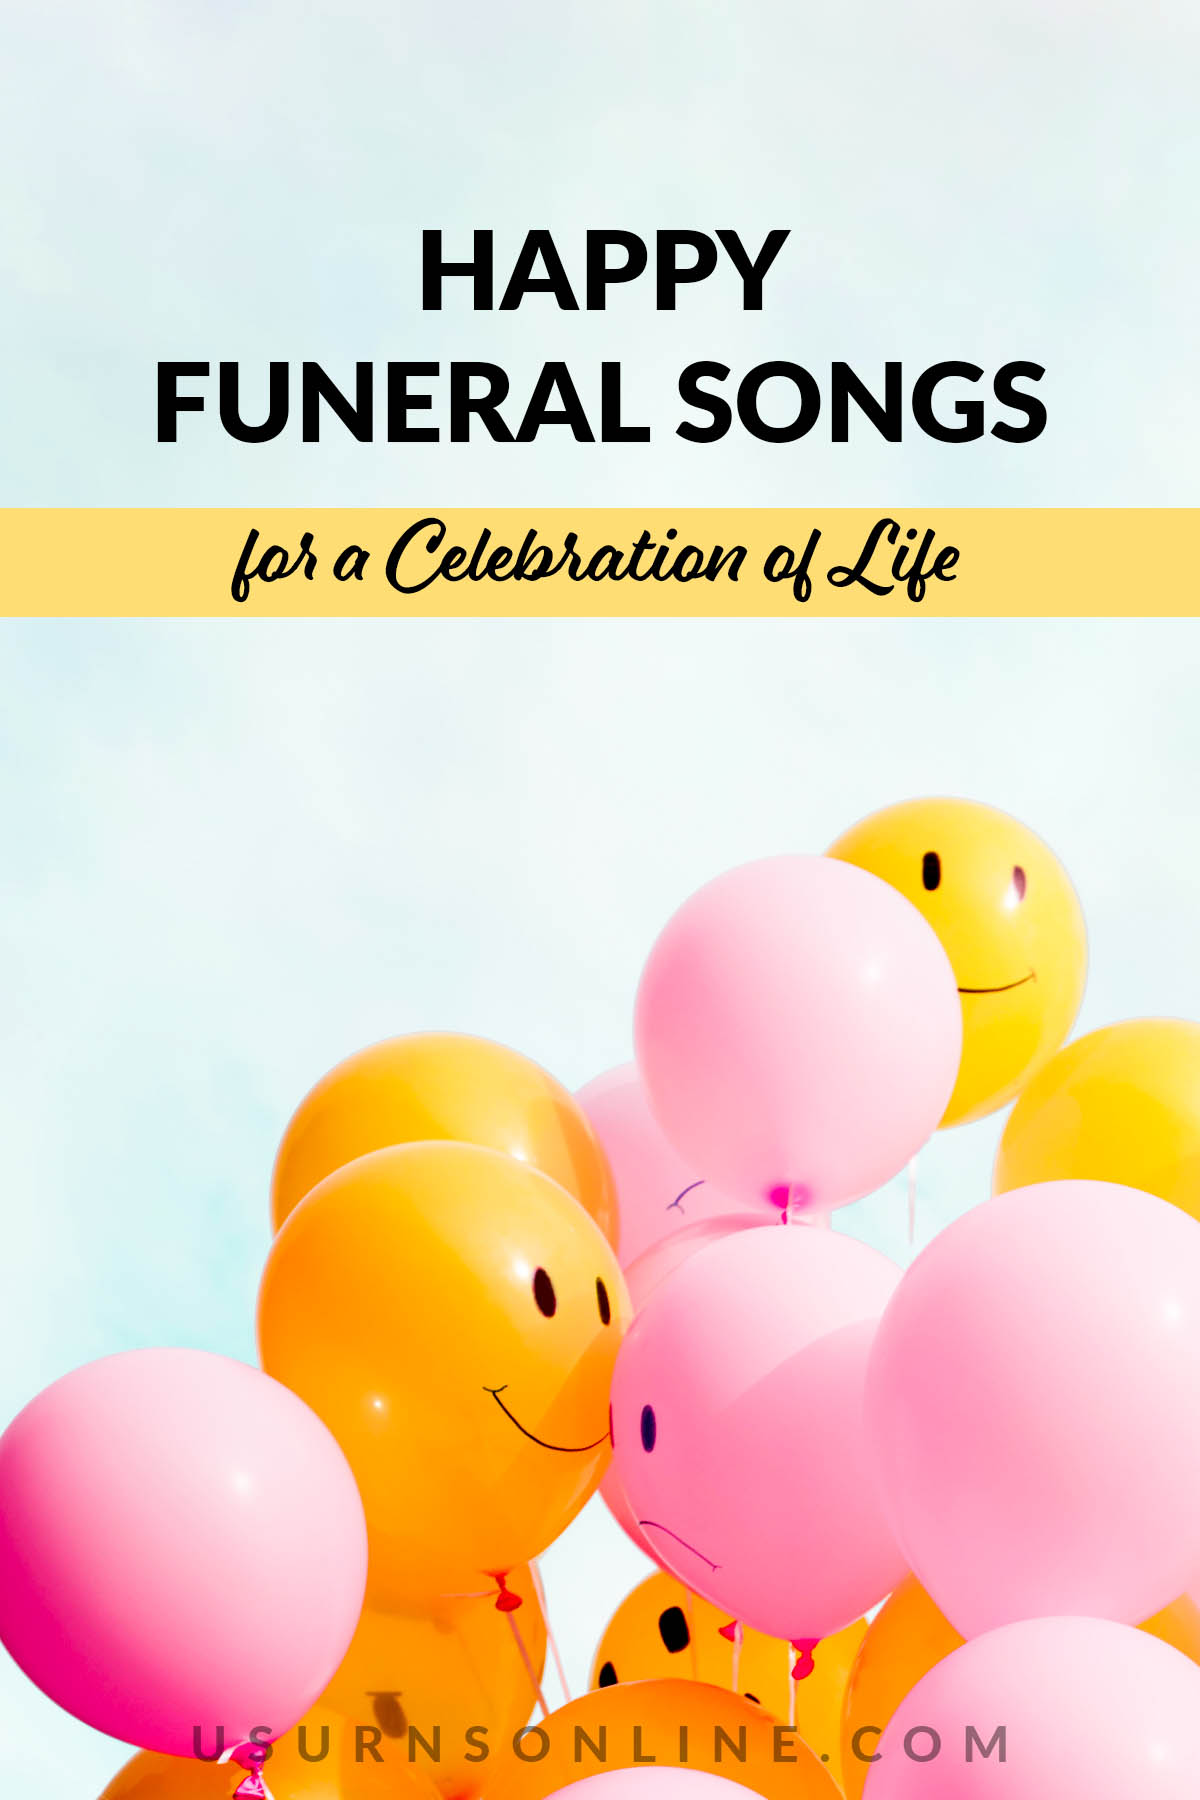 happy funeral songs - feature image